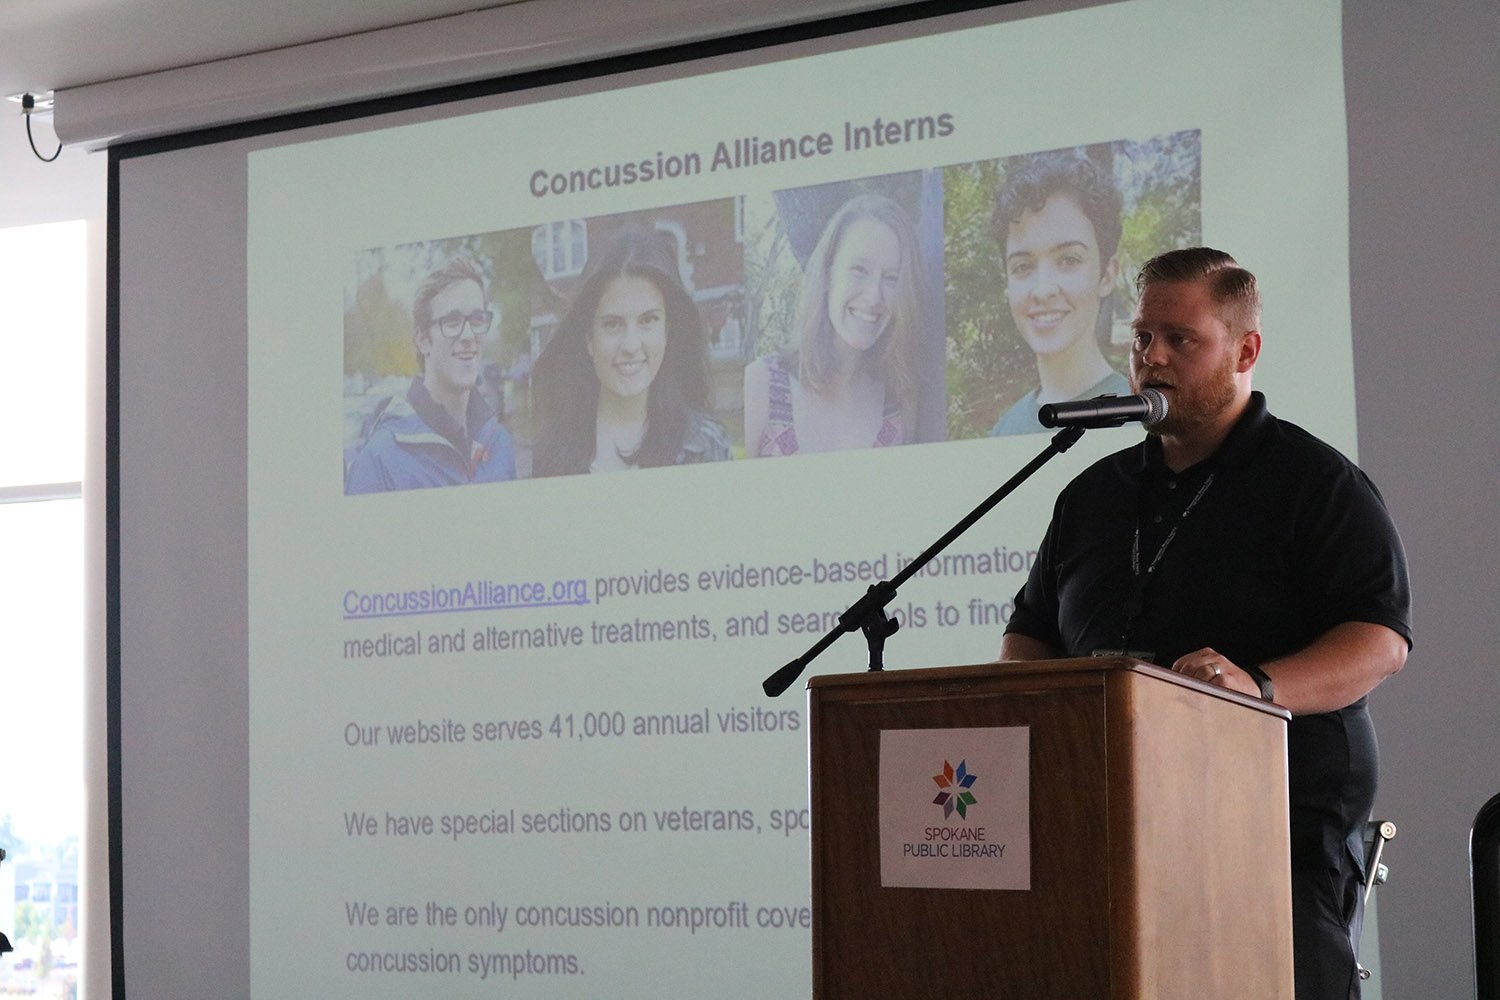  Concussion Alliance’s presentation on their very successful internship programs - educating future medical workers and writers on concussion diagnosis, recovery, and protocols in Cascadia and beyond. 